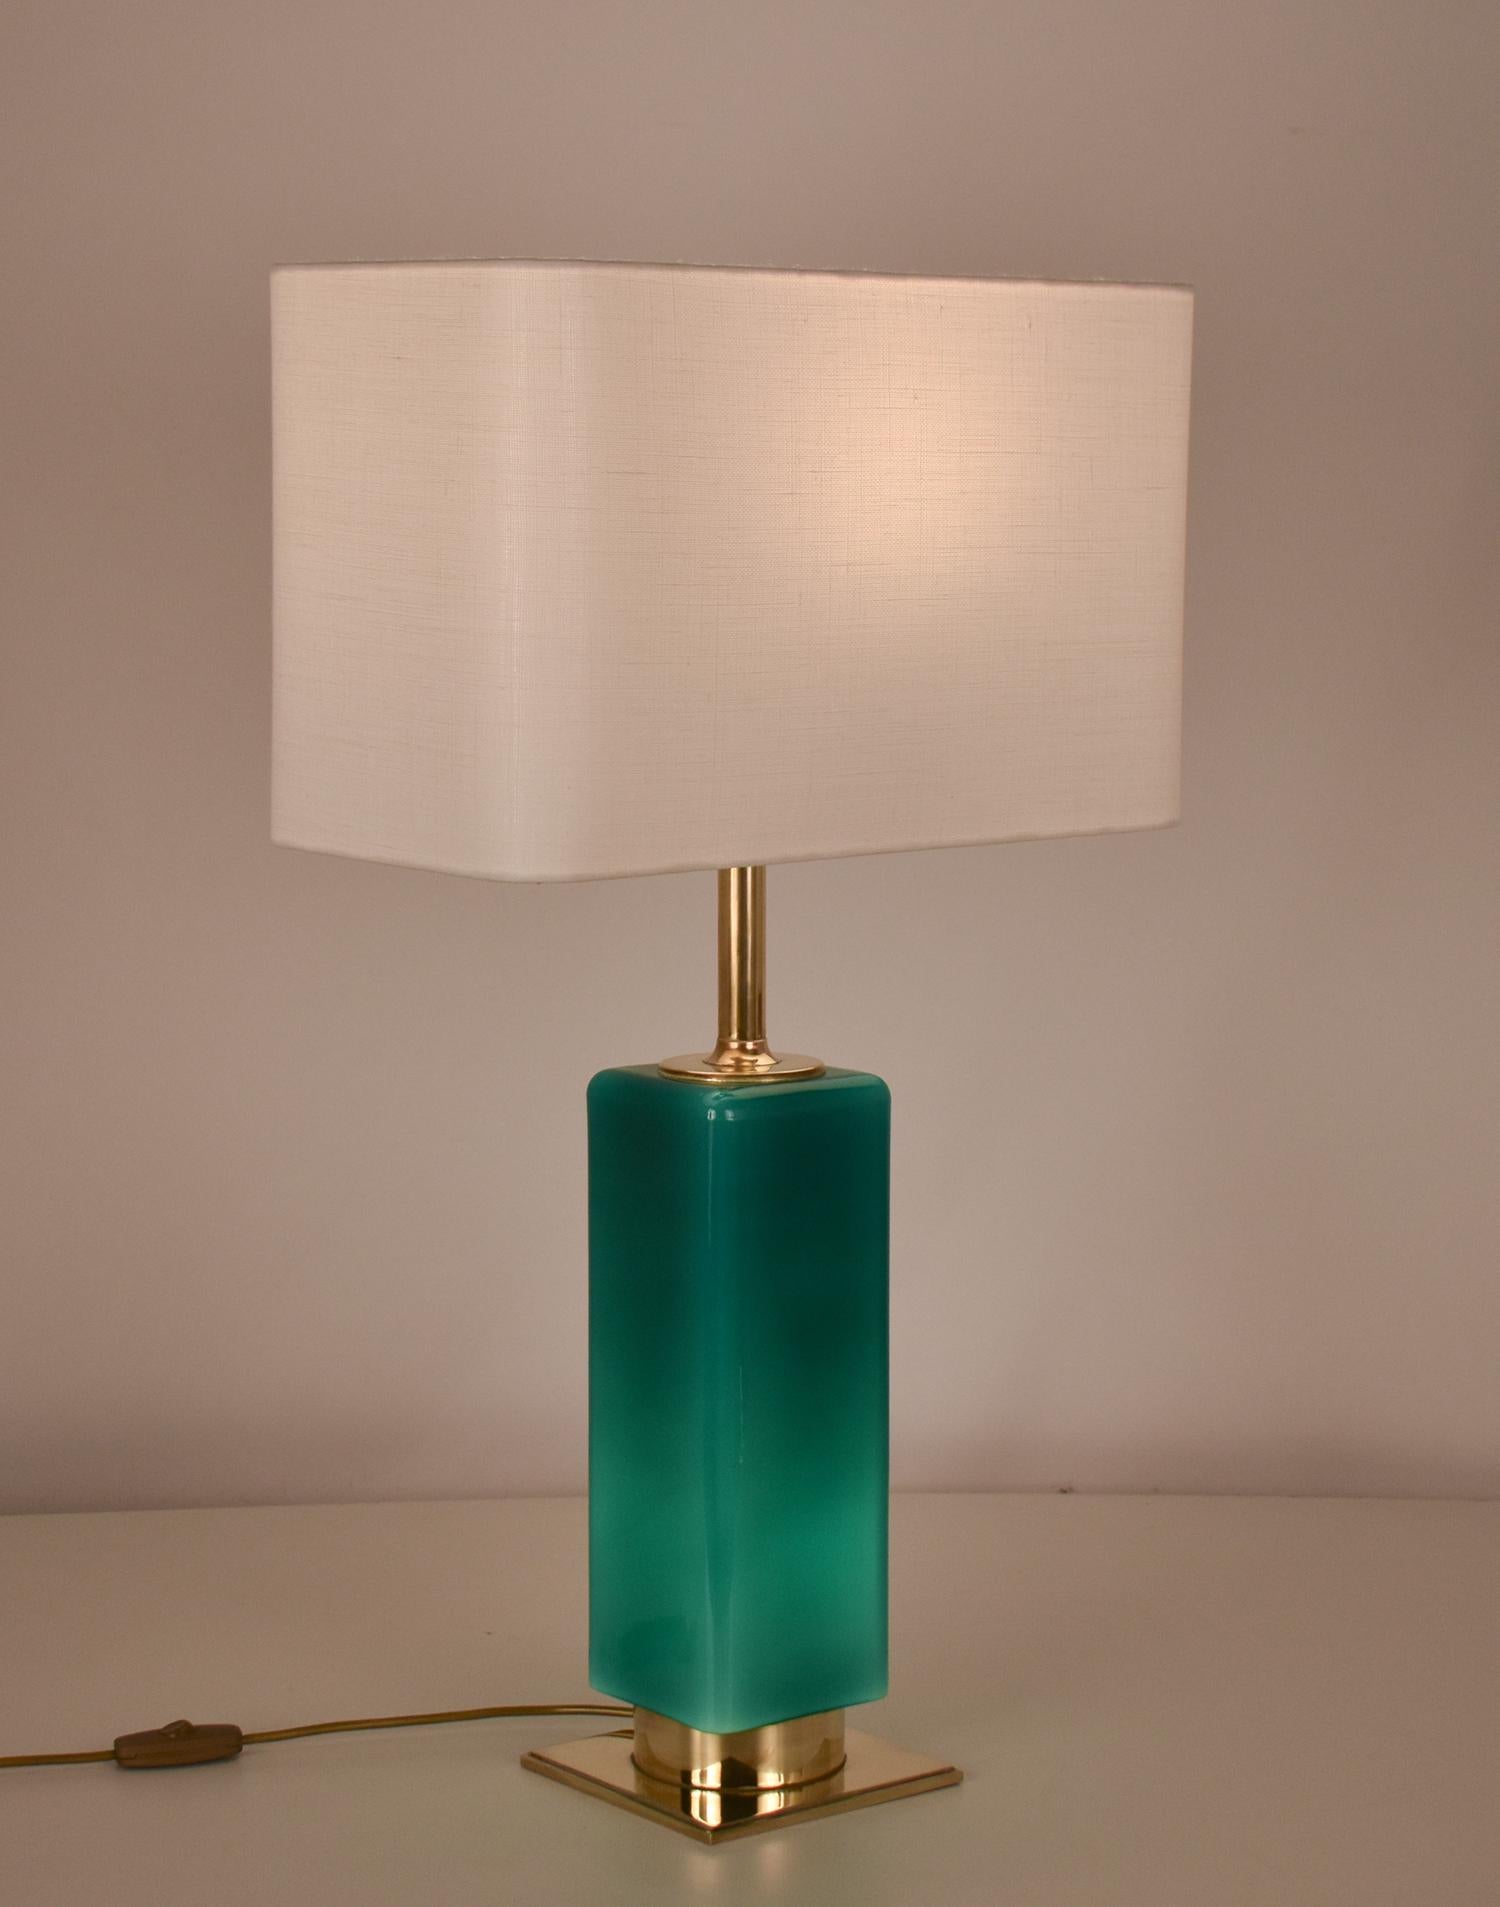 Mid- Century Large Green Glass and Brass Table Lamp Metalarte, Spain, 1970's For Sale 8